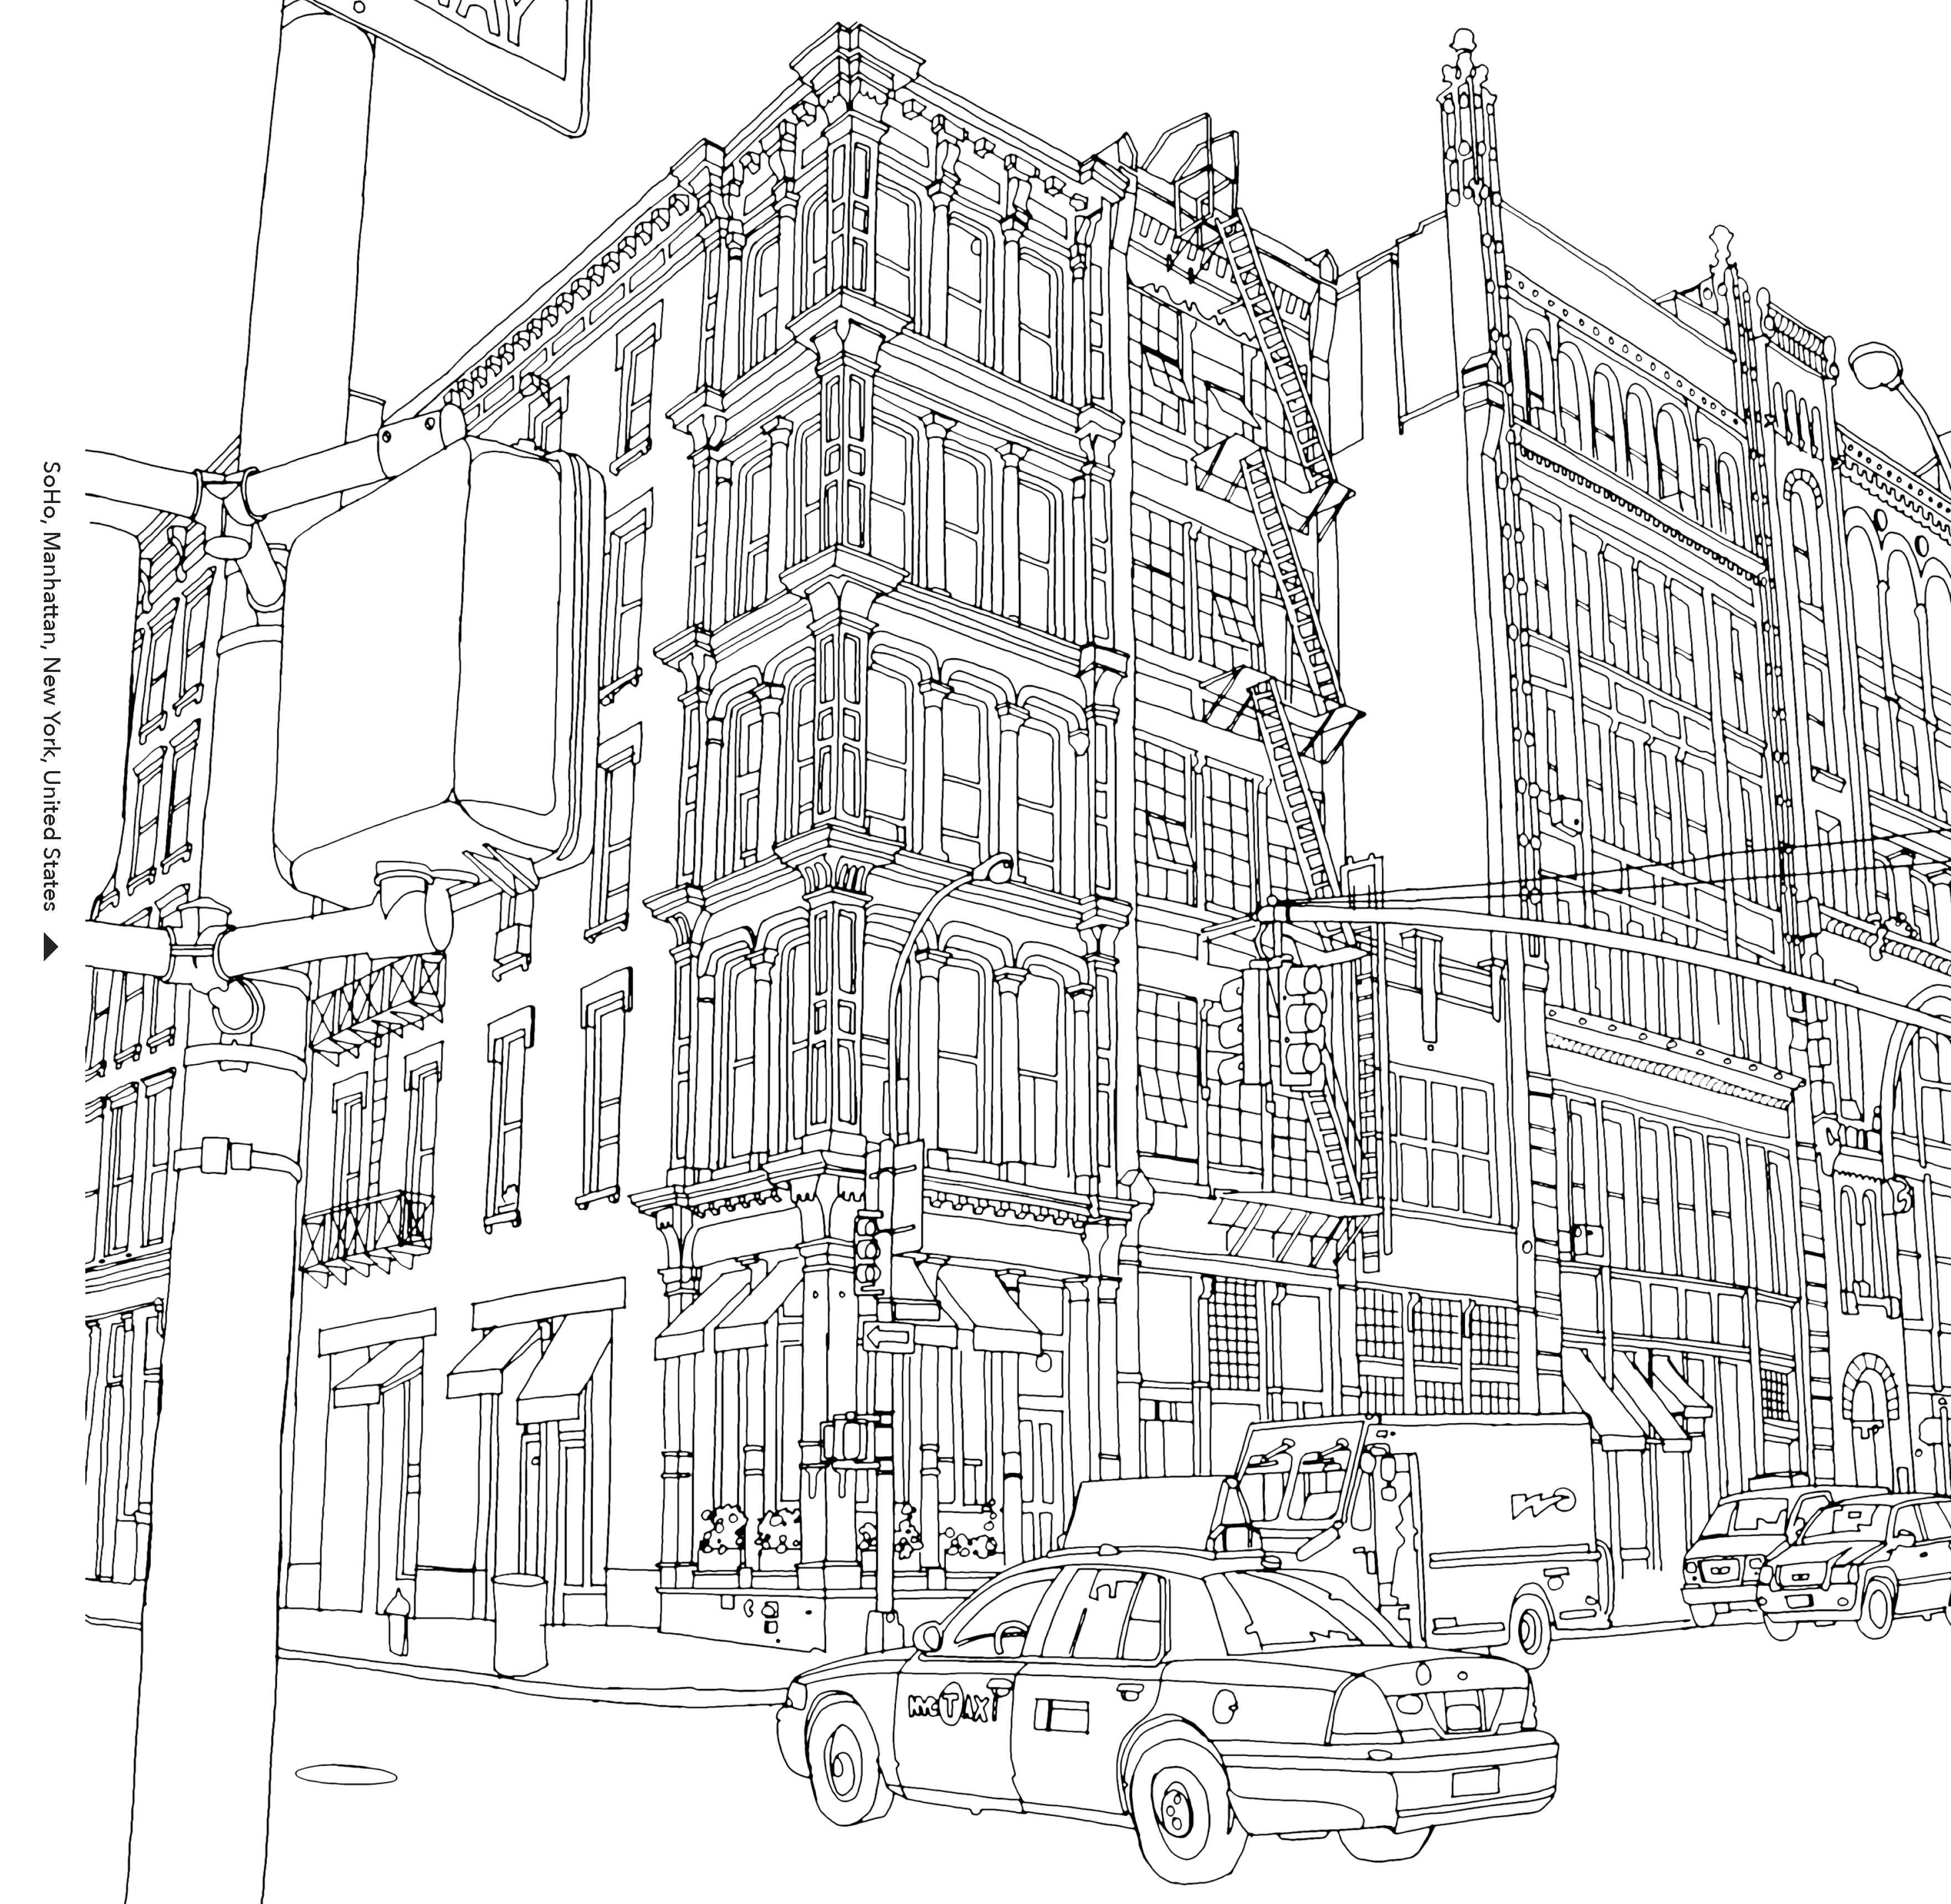 City Coloring Page New York City Coloring Pages Best Of City Coloring Page Ziglafo